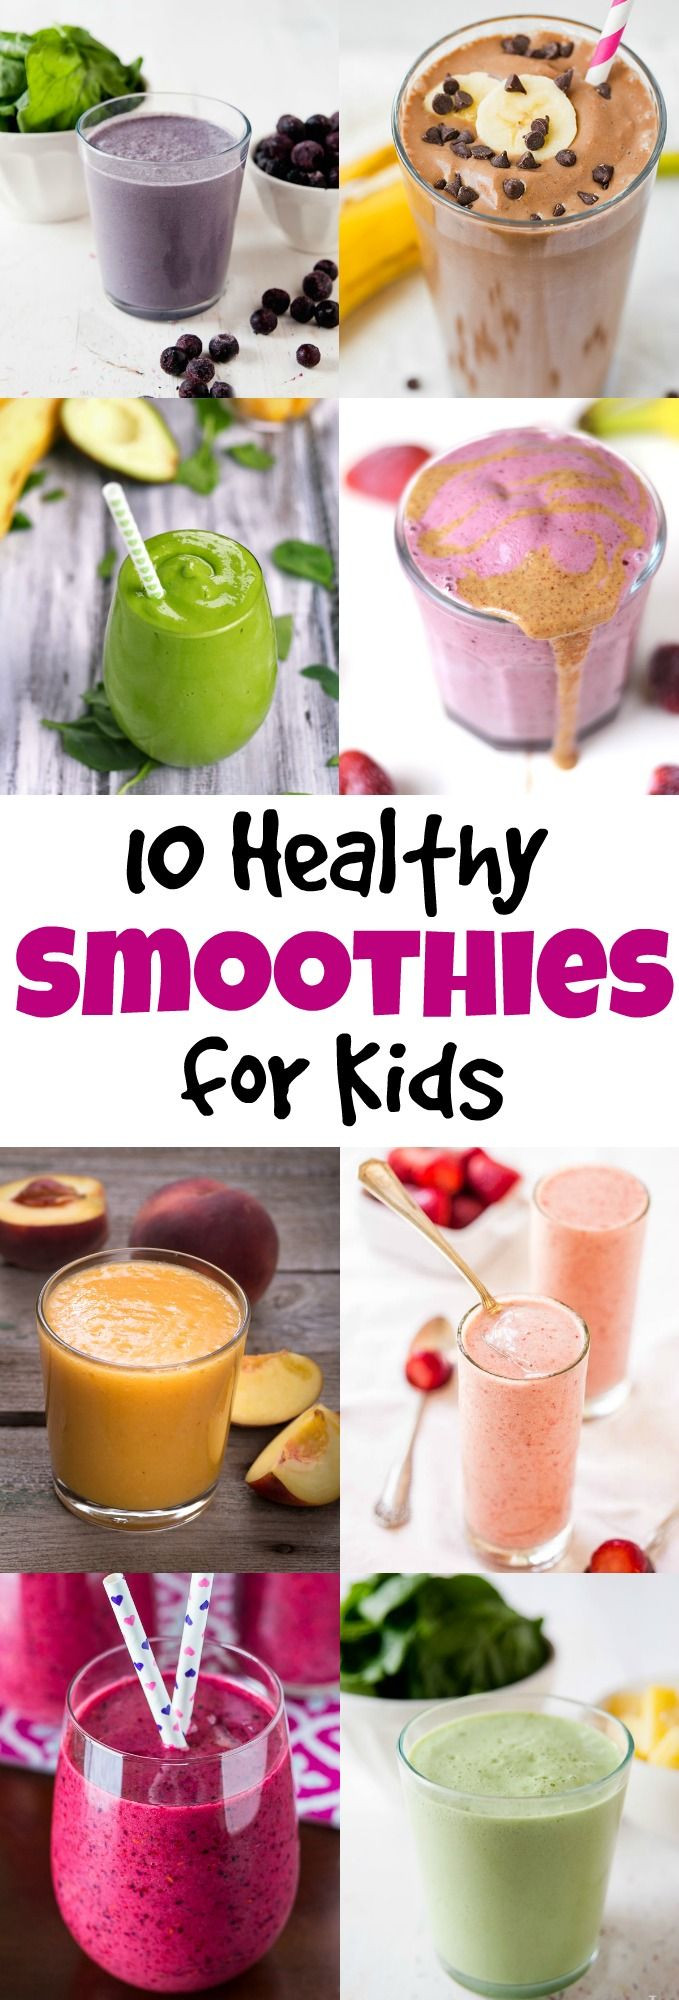 Healthy Kid Friendly Smoothies
 10 Healthy Smoothies for Kids